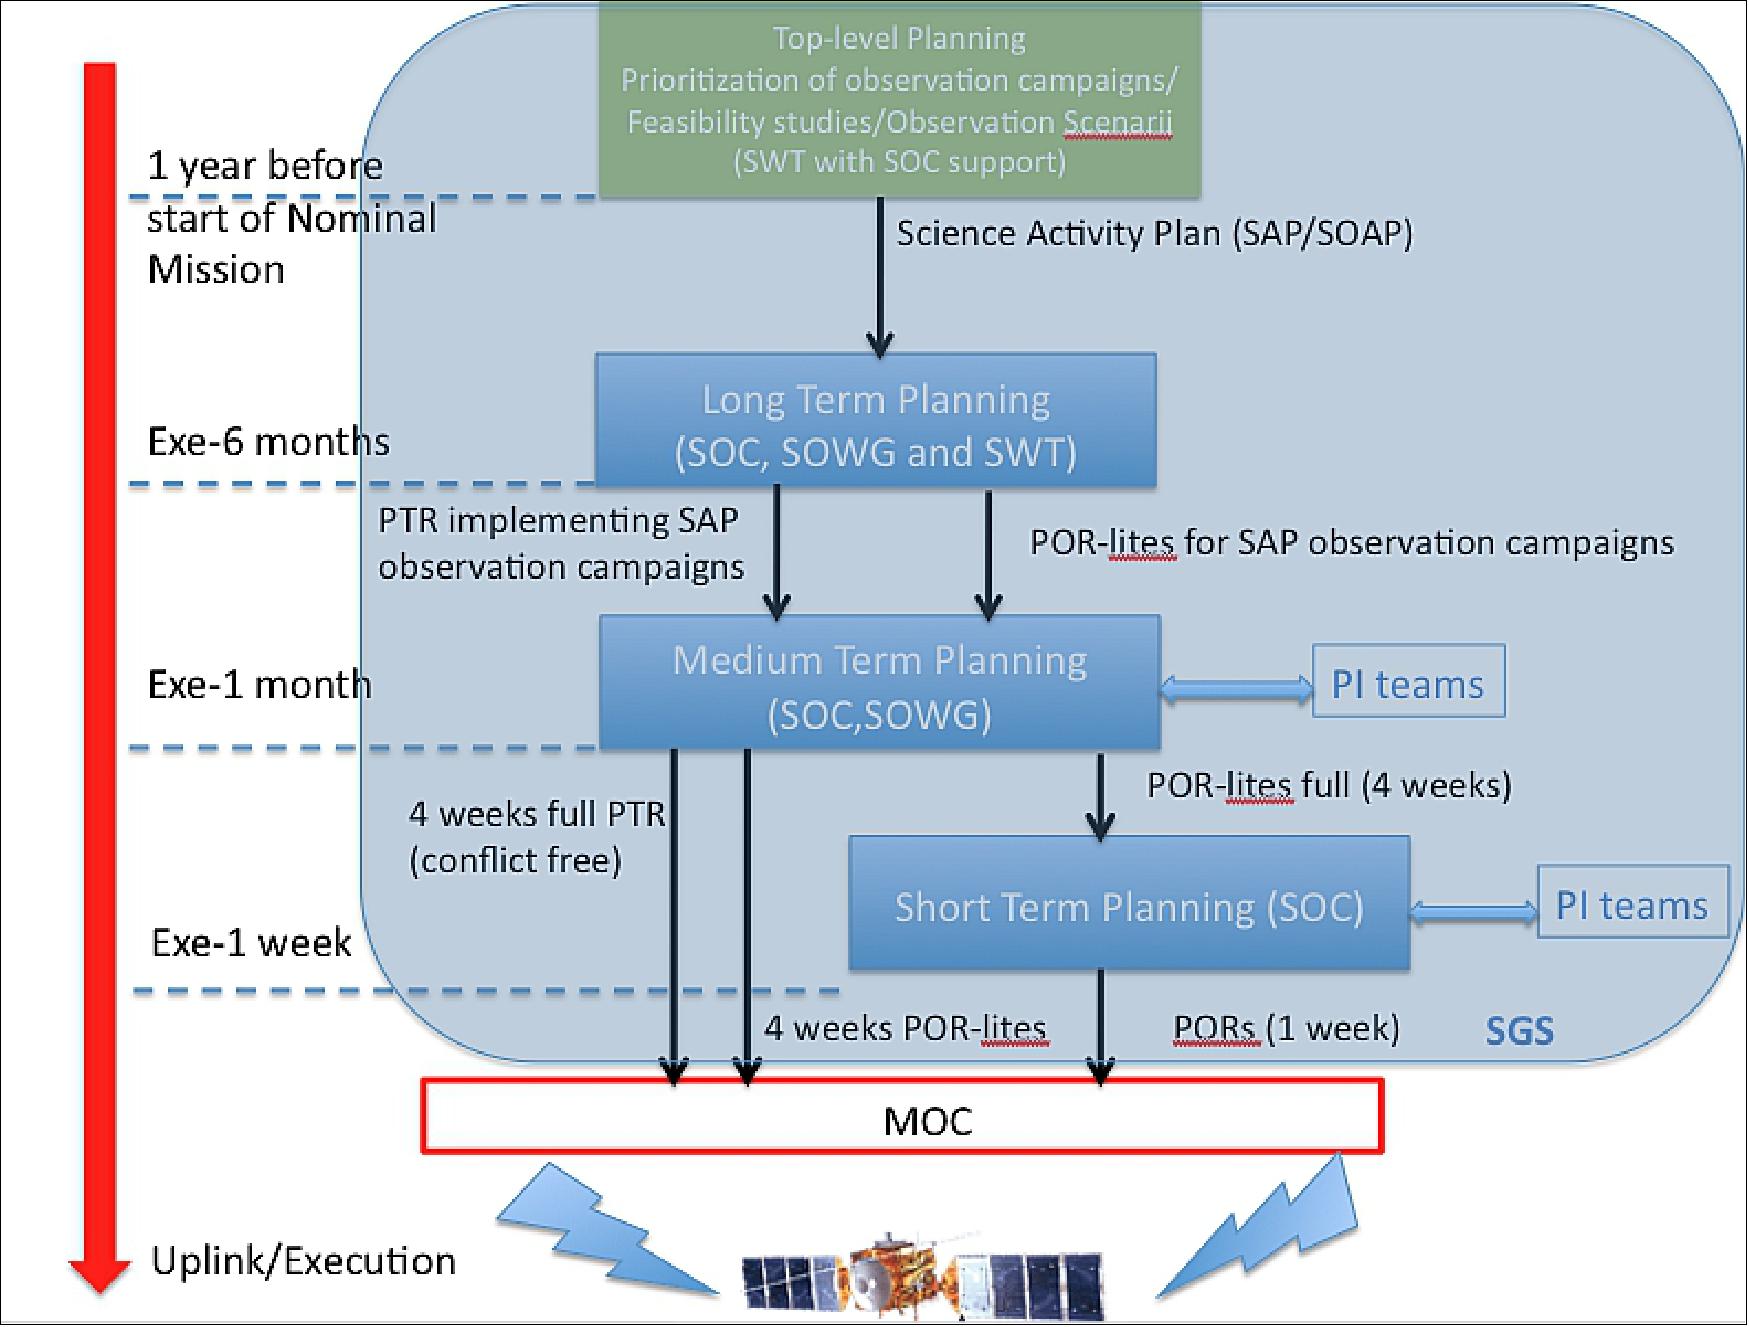 Figure 2: Top-level overview of the JUICE operations planning activities. Schematic timeline, workflow and interfaces of the different science planning levels, from the top level science activity plan to the uplink of instrument commands. The blue, semi-transparent box indicates all science planning related to SGS activities (PI teams and SOC).